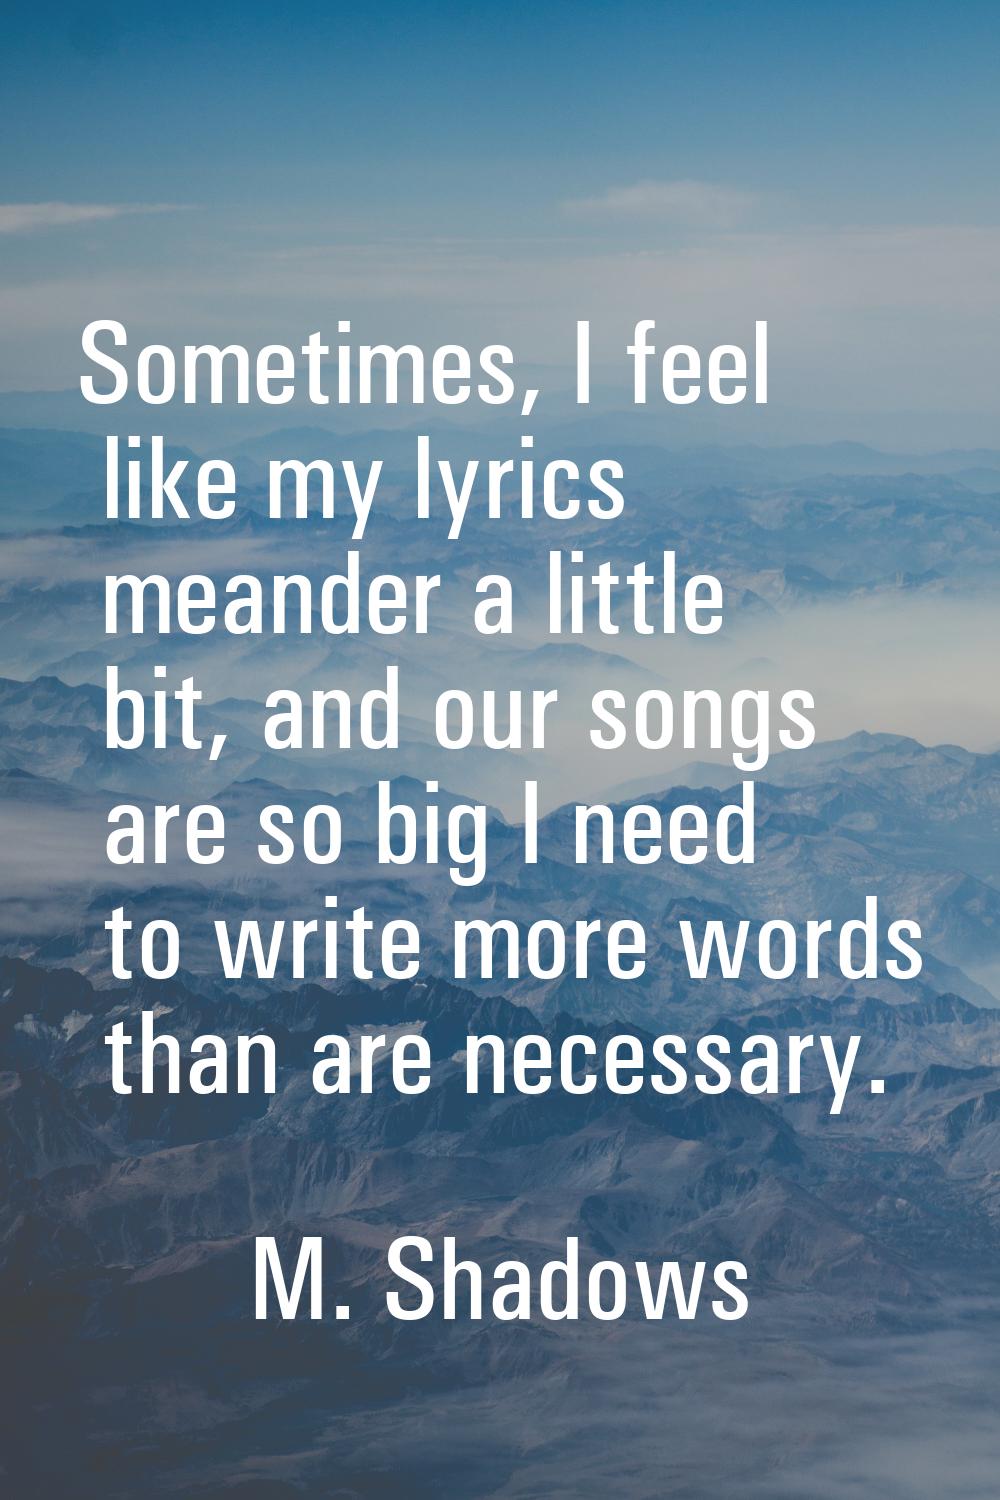 Sometimes, I feel like my lyrics meander a little bit, and our songs are so big I need to write mor